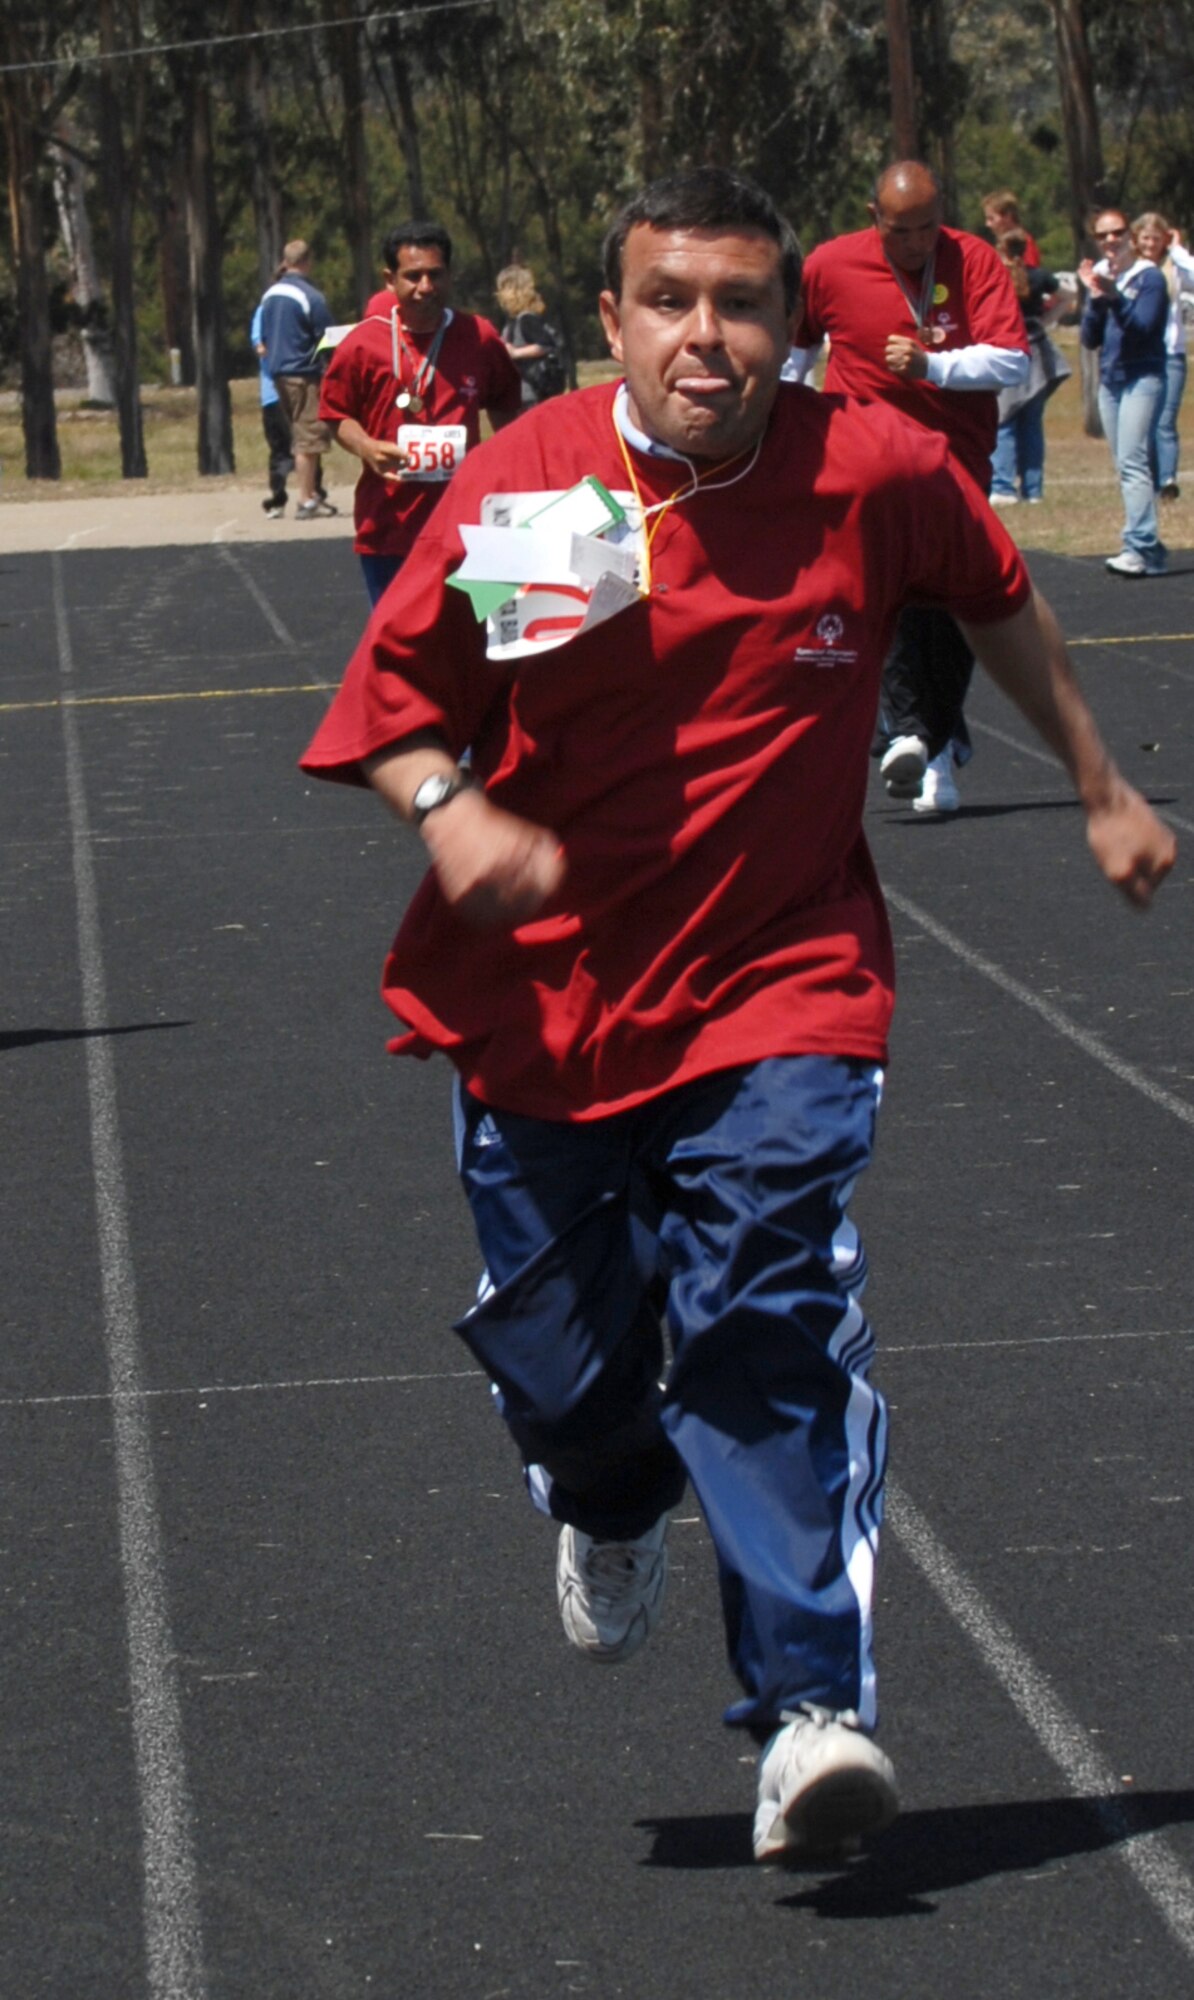 On his way to finish in first place, Ramare Ceja races during the 100-yard run at the Special Olympics held at the Vandenberg track April 21.  (Photo by Staff Sgt. Jamie Lessard)